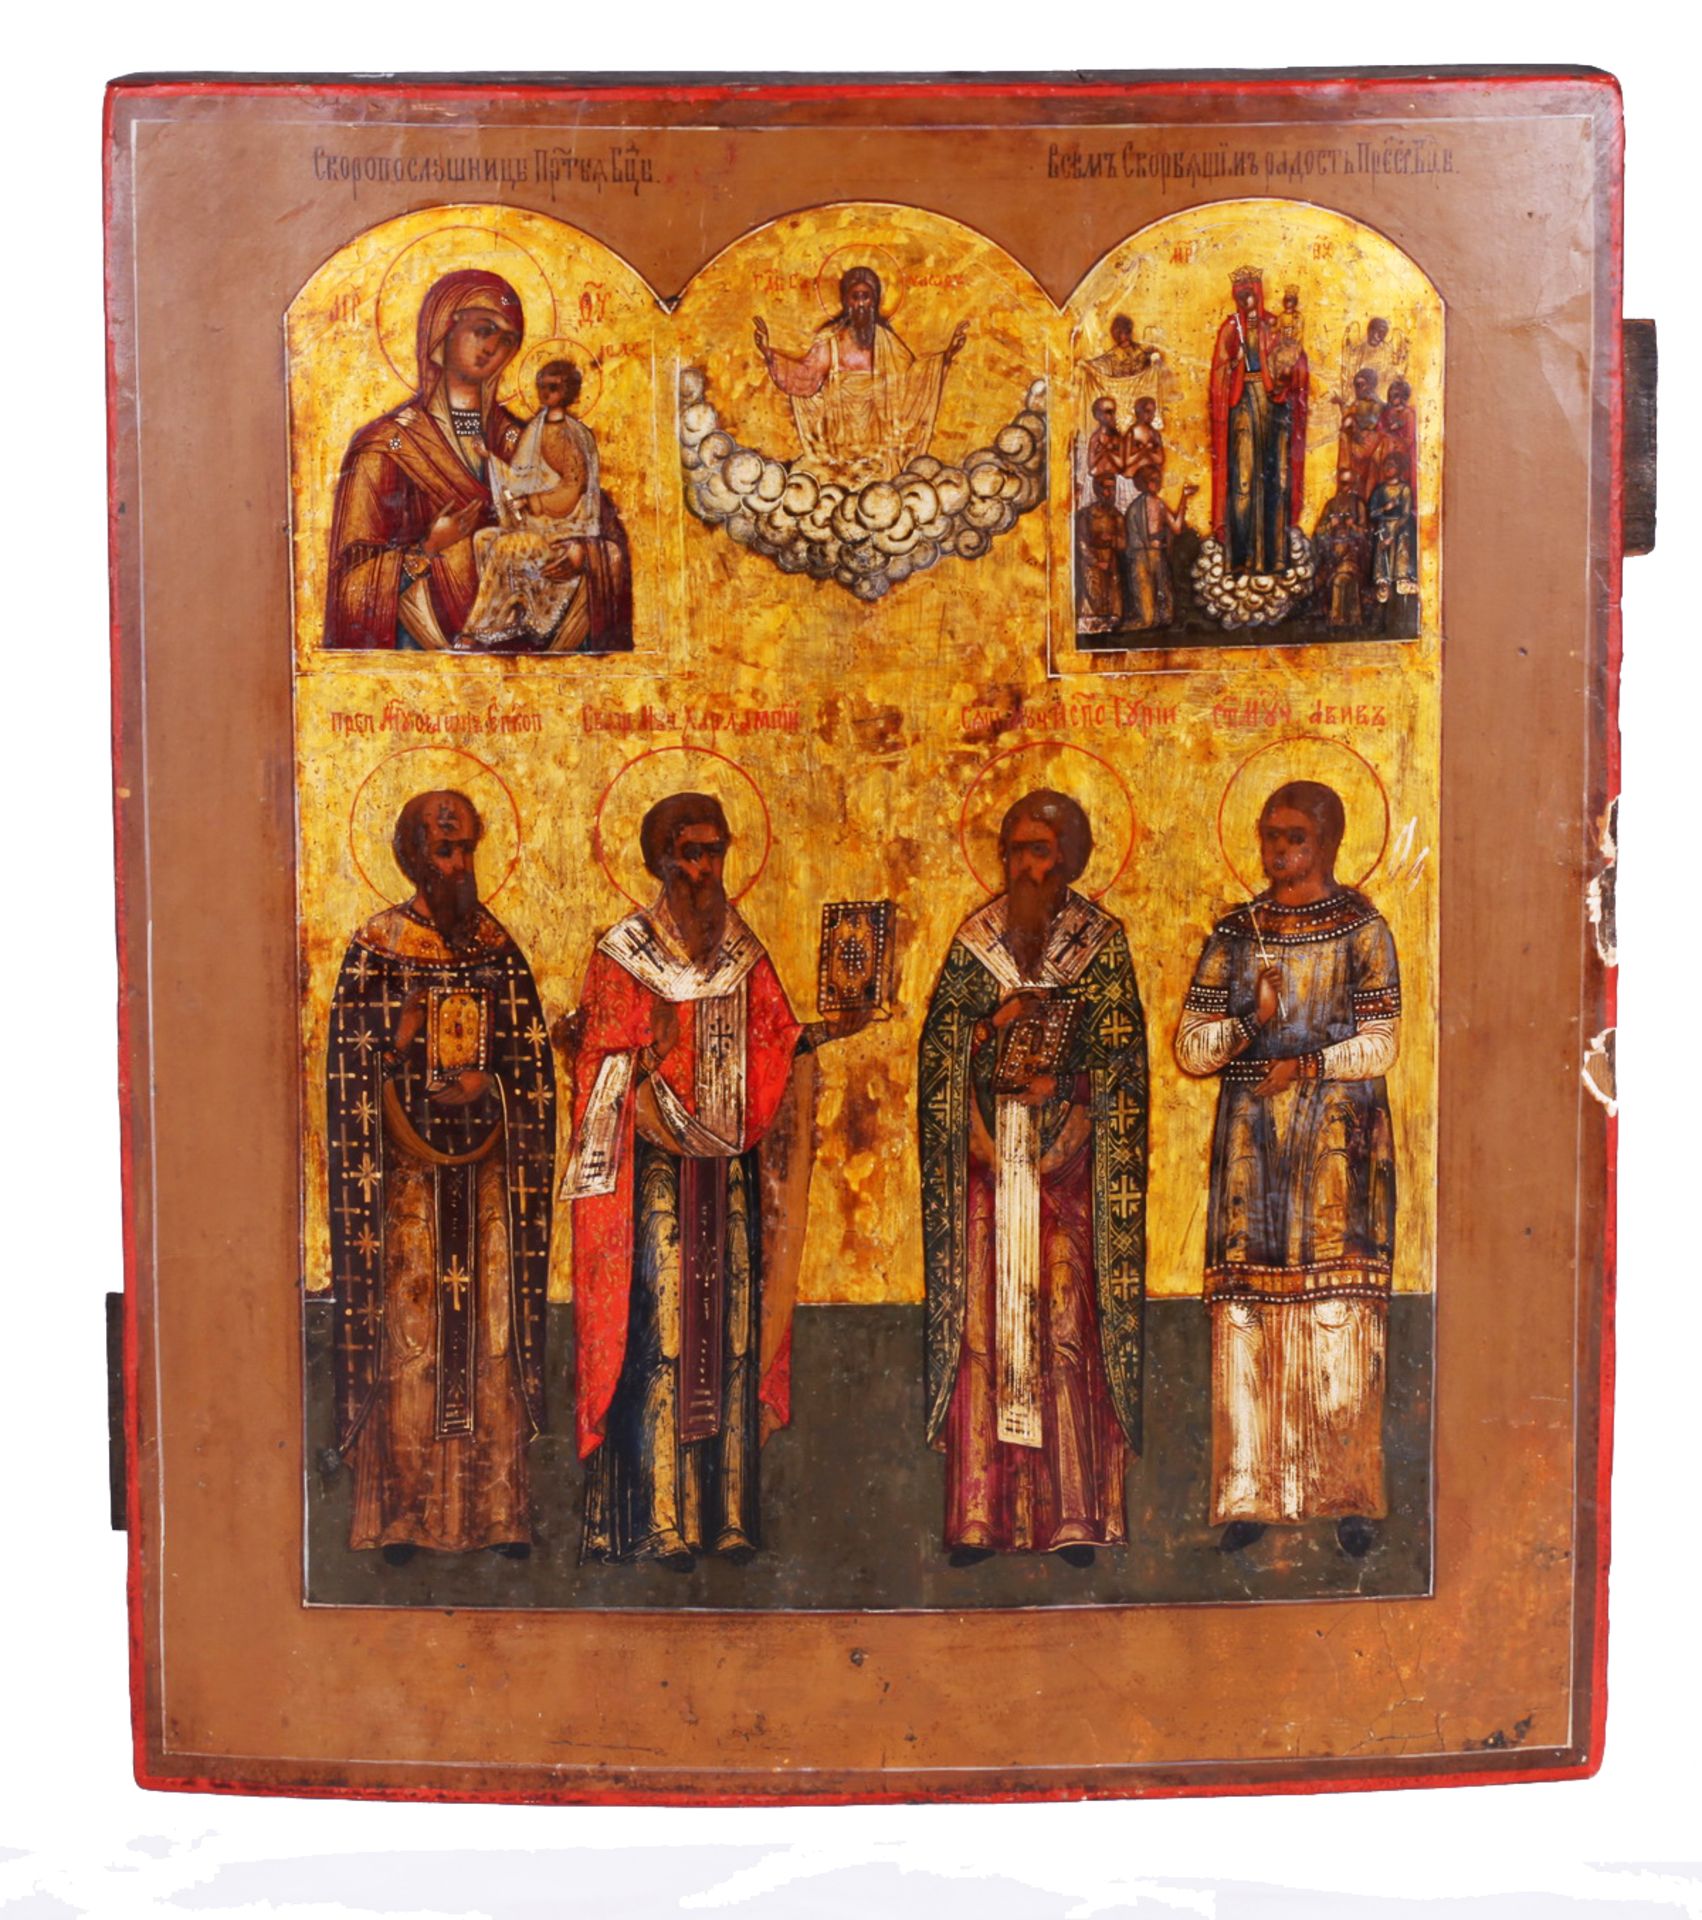 Three-part Russian icon "The Hierarchs, The Theotokos of Tikhvin, The birth of Christ". 